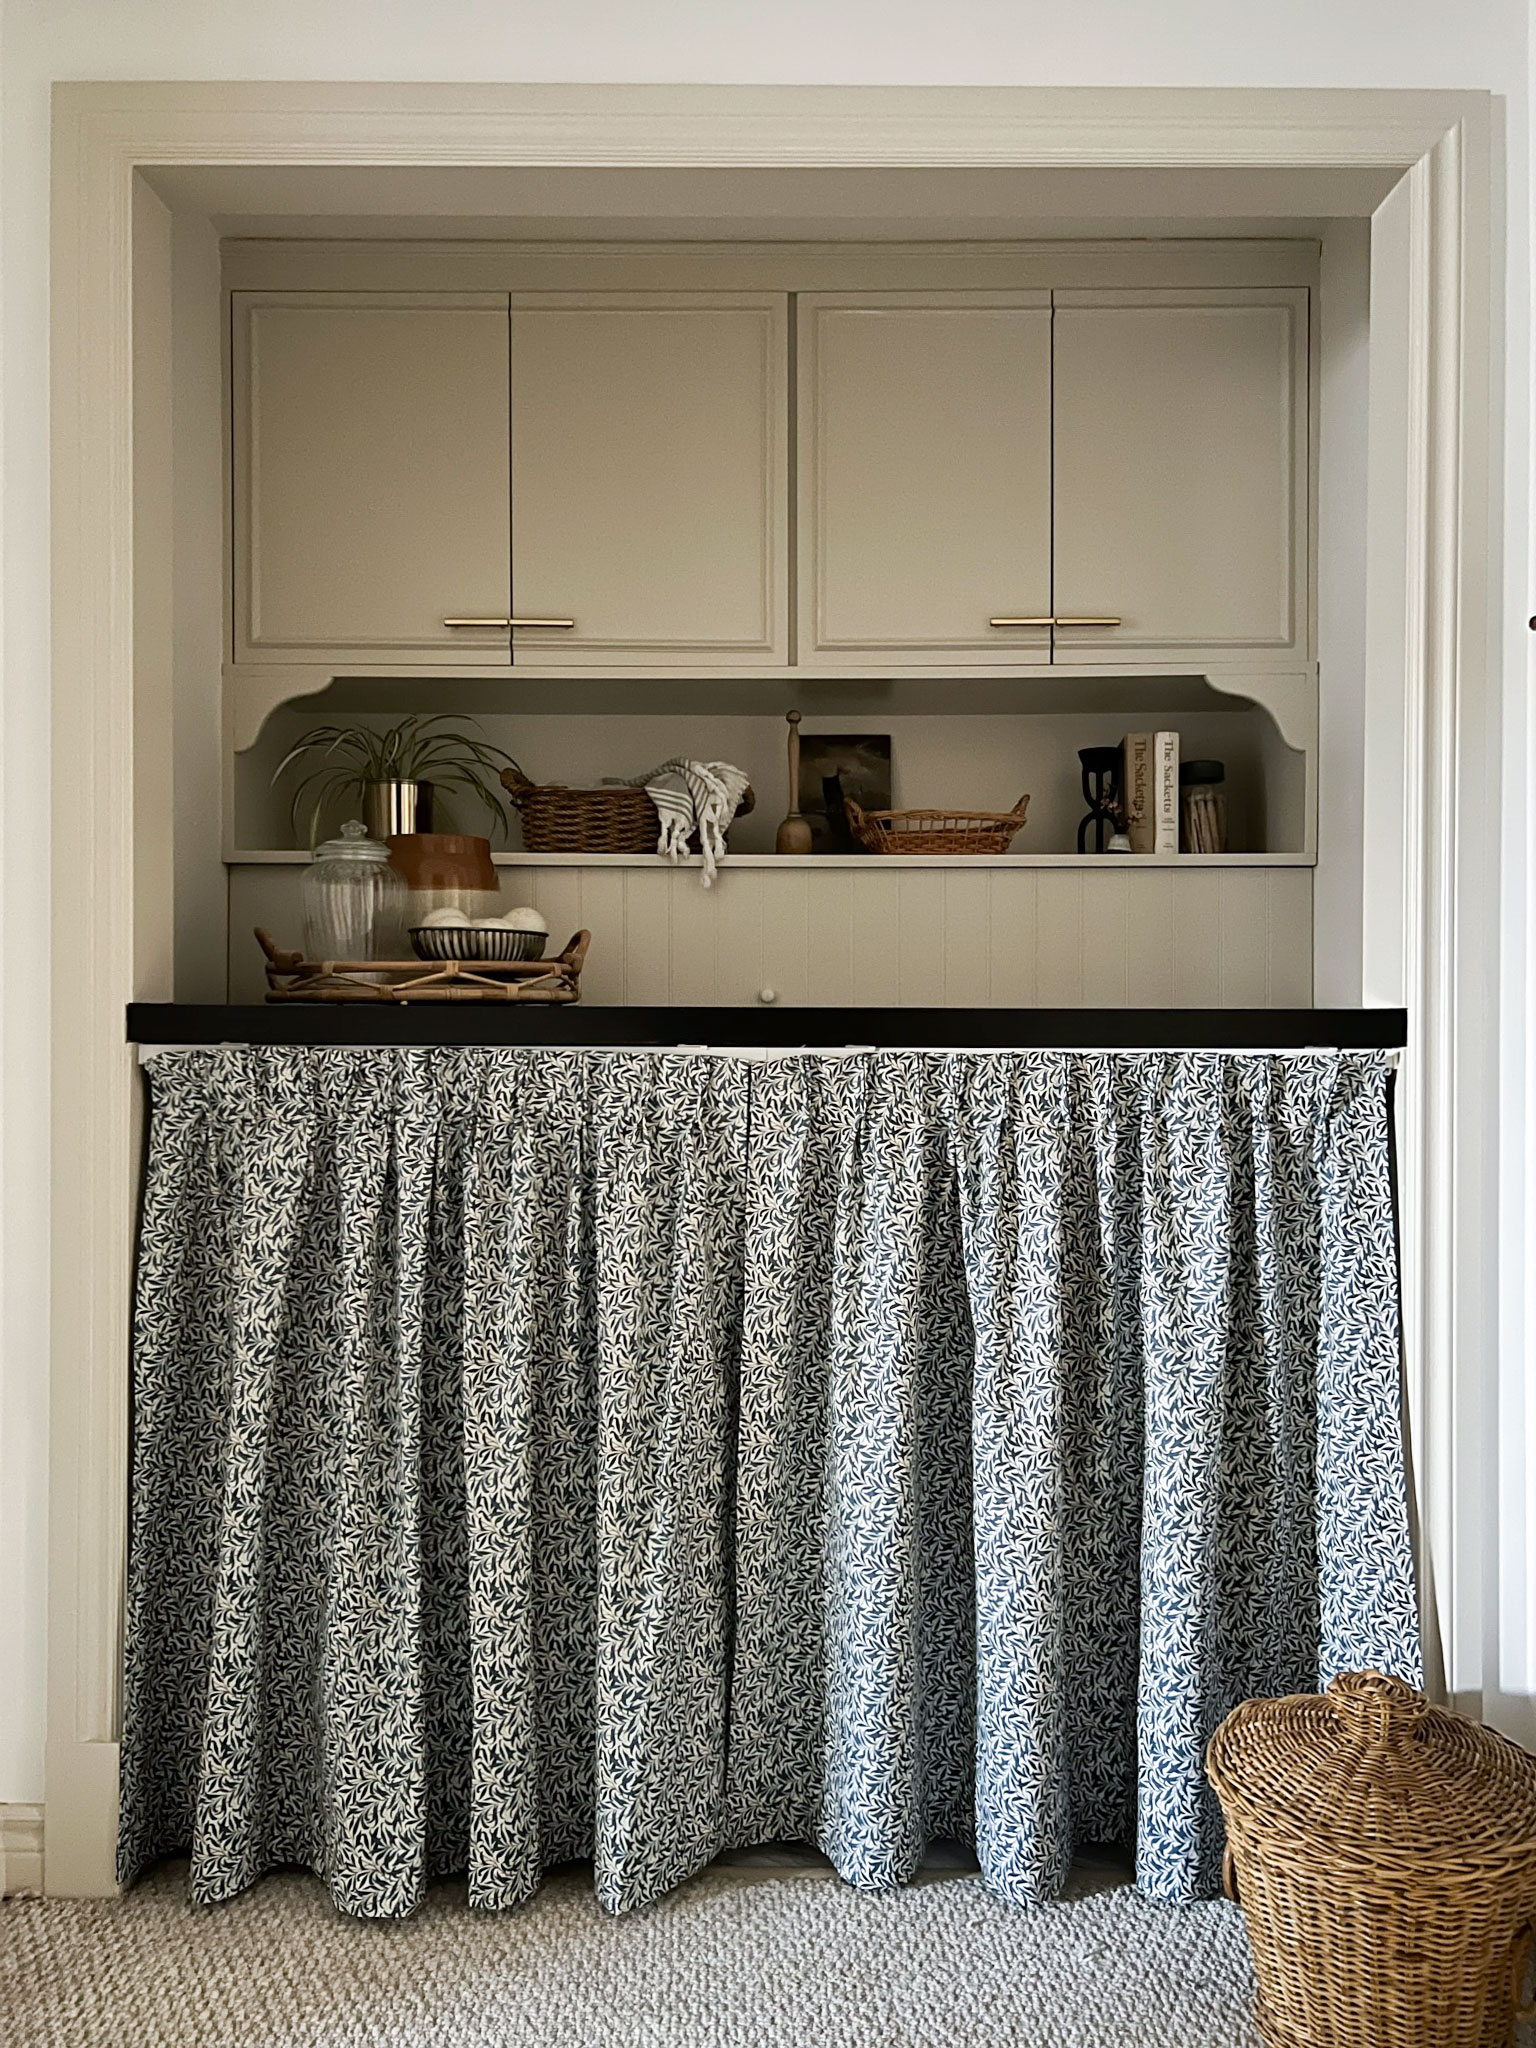 closet opening with beige cabinets in edgcomb gray, shelf below styled iwth various items, black countertop, and a william morris curtain skirt below the counter. Basket on the floor